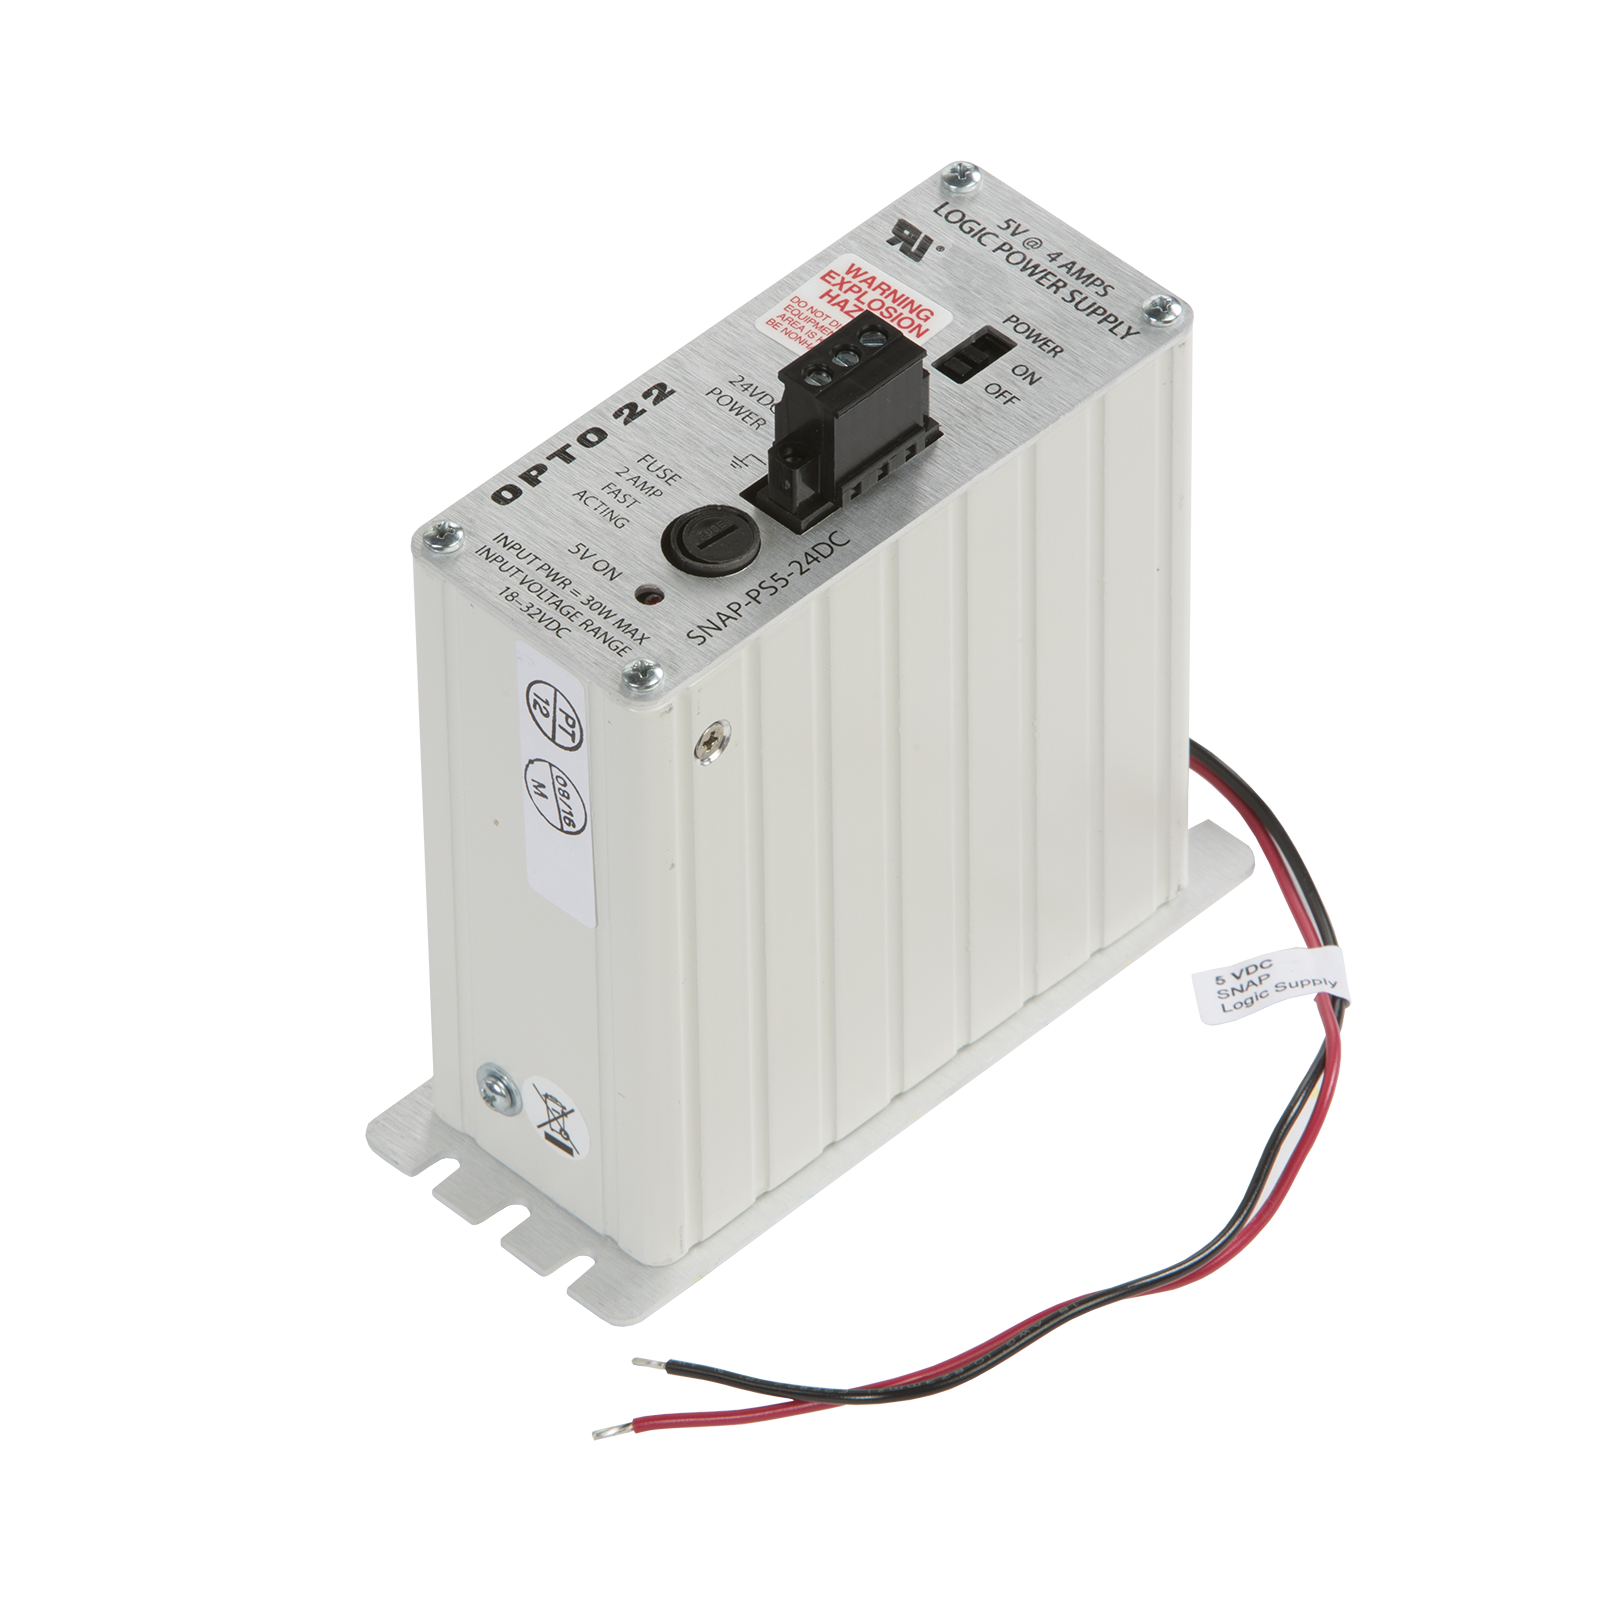 Opto22 - SNAP-PS5-24DC - SNAP Power Supply, 24 VDC input, 5 VDC output